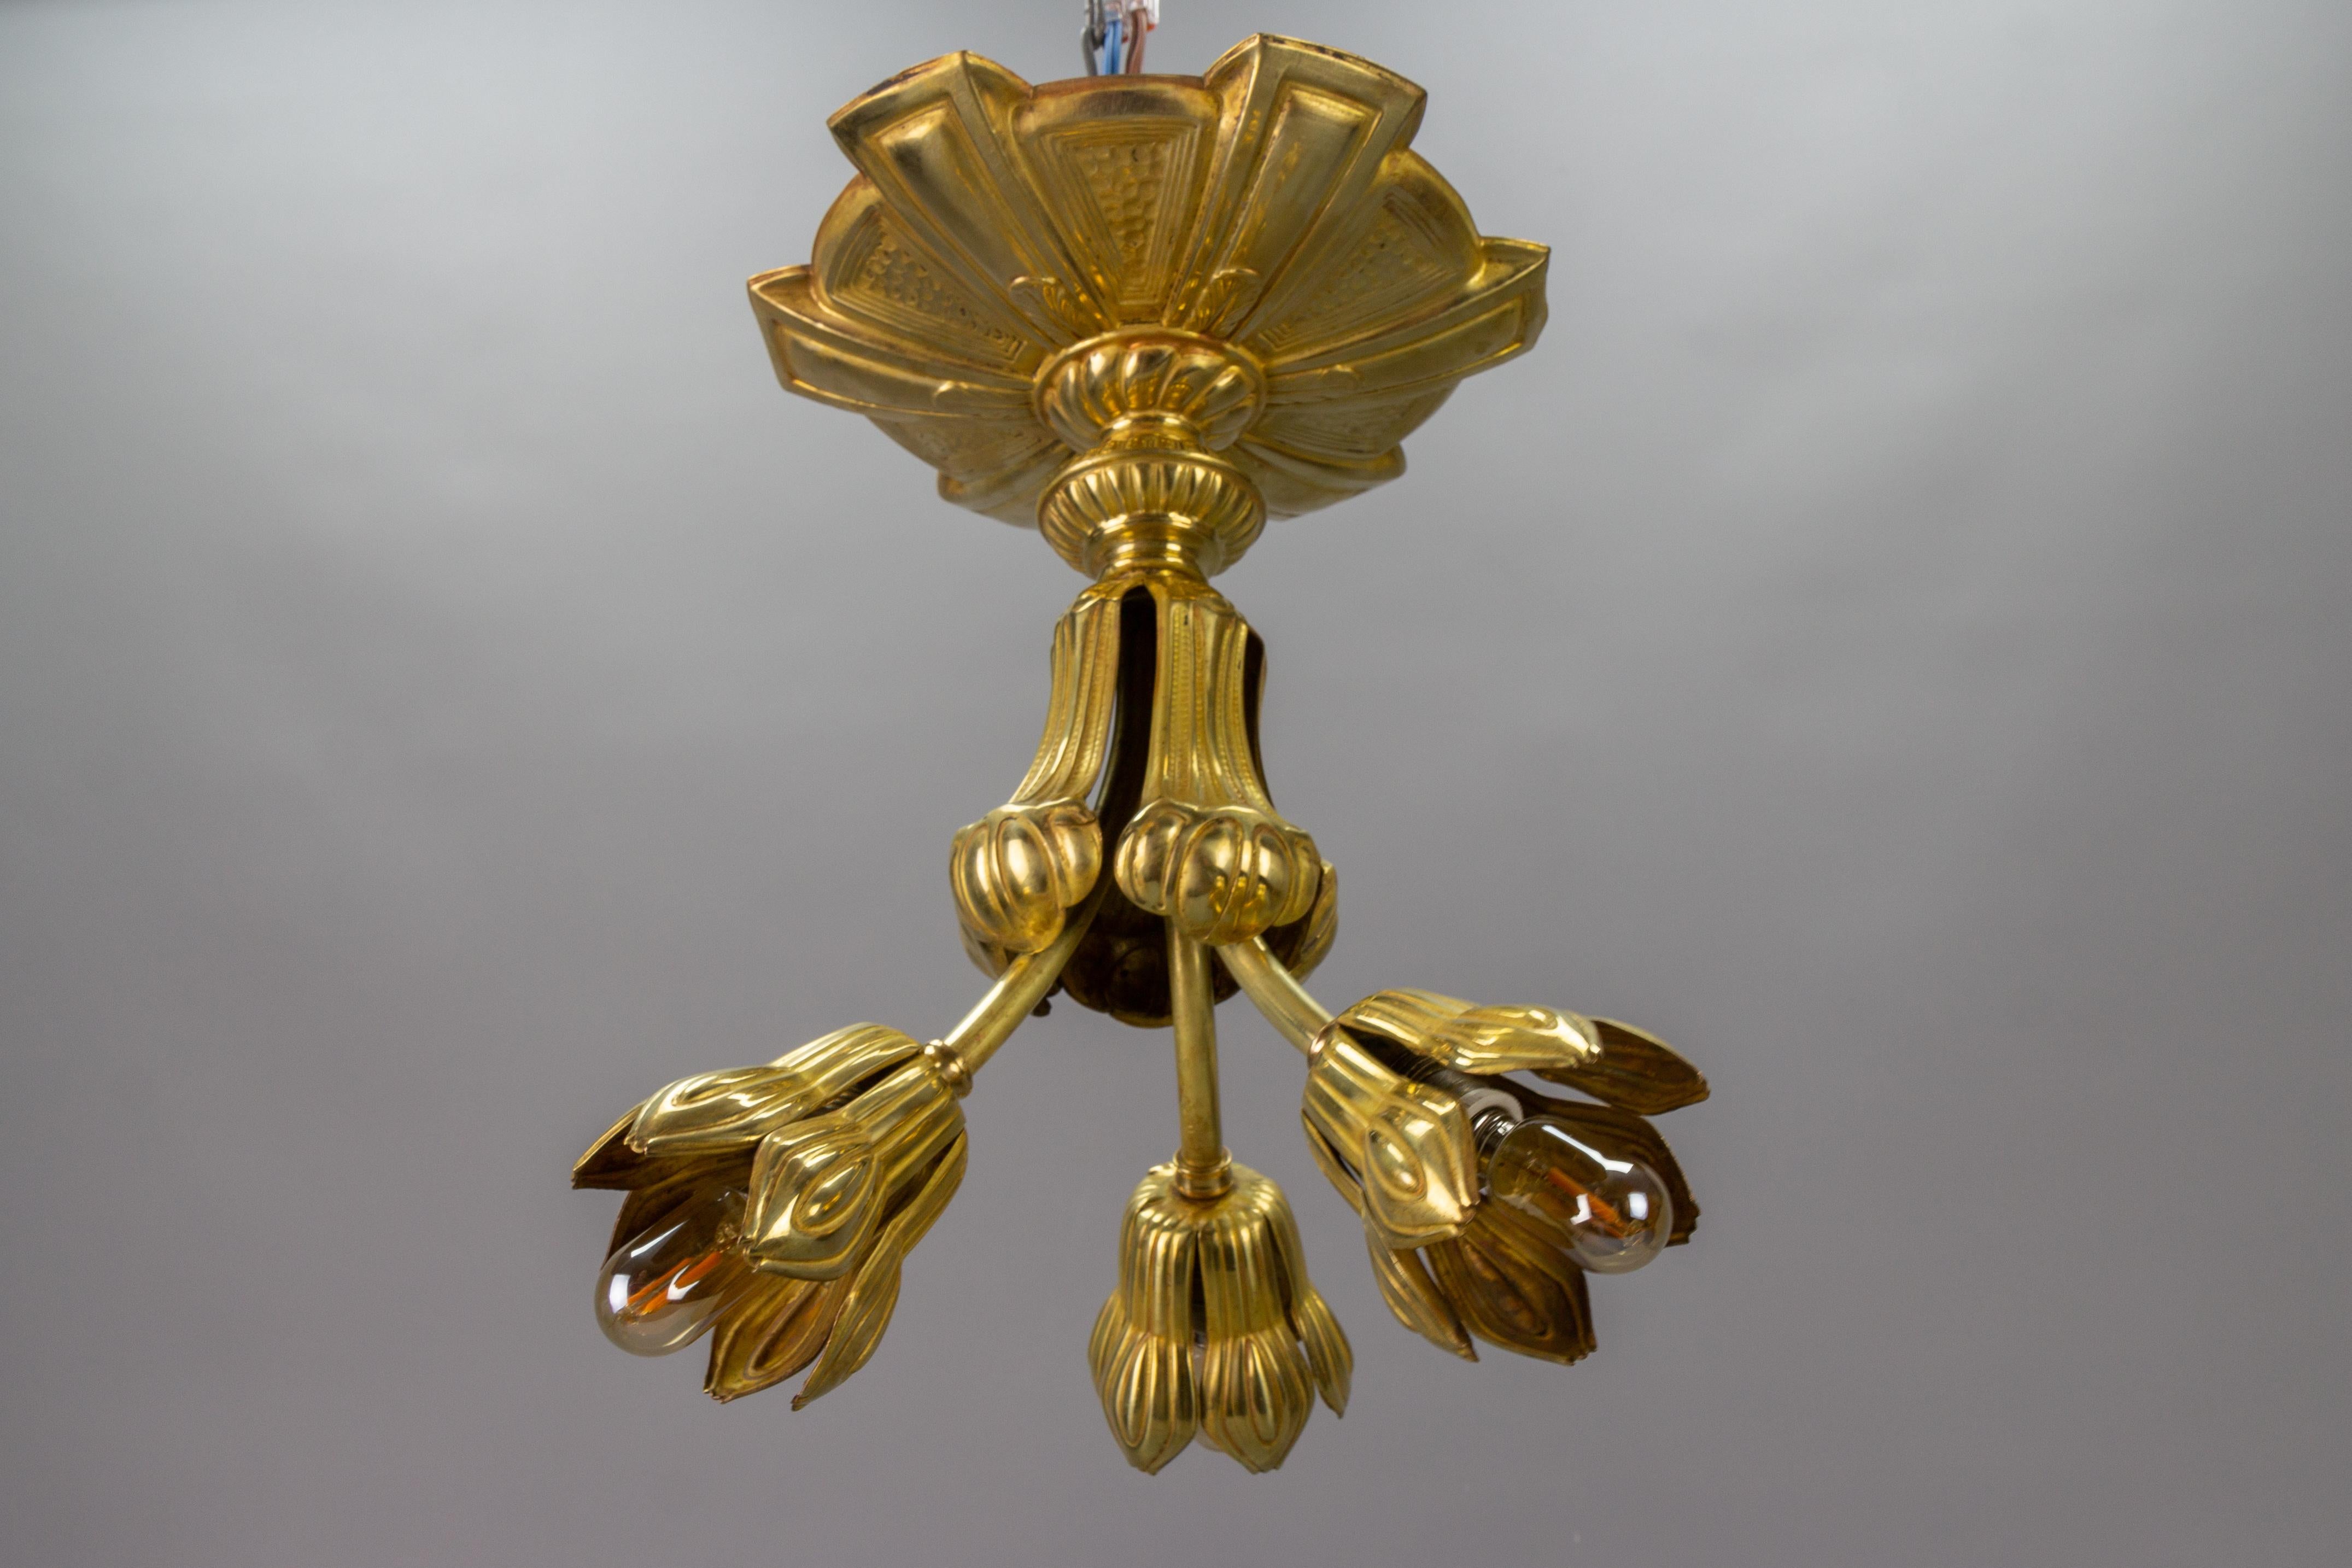  French Art Deco Three-Light Brass Ceiling Light Fixture, 1920s For Sale 3